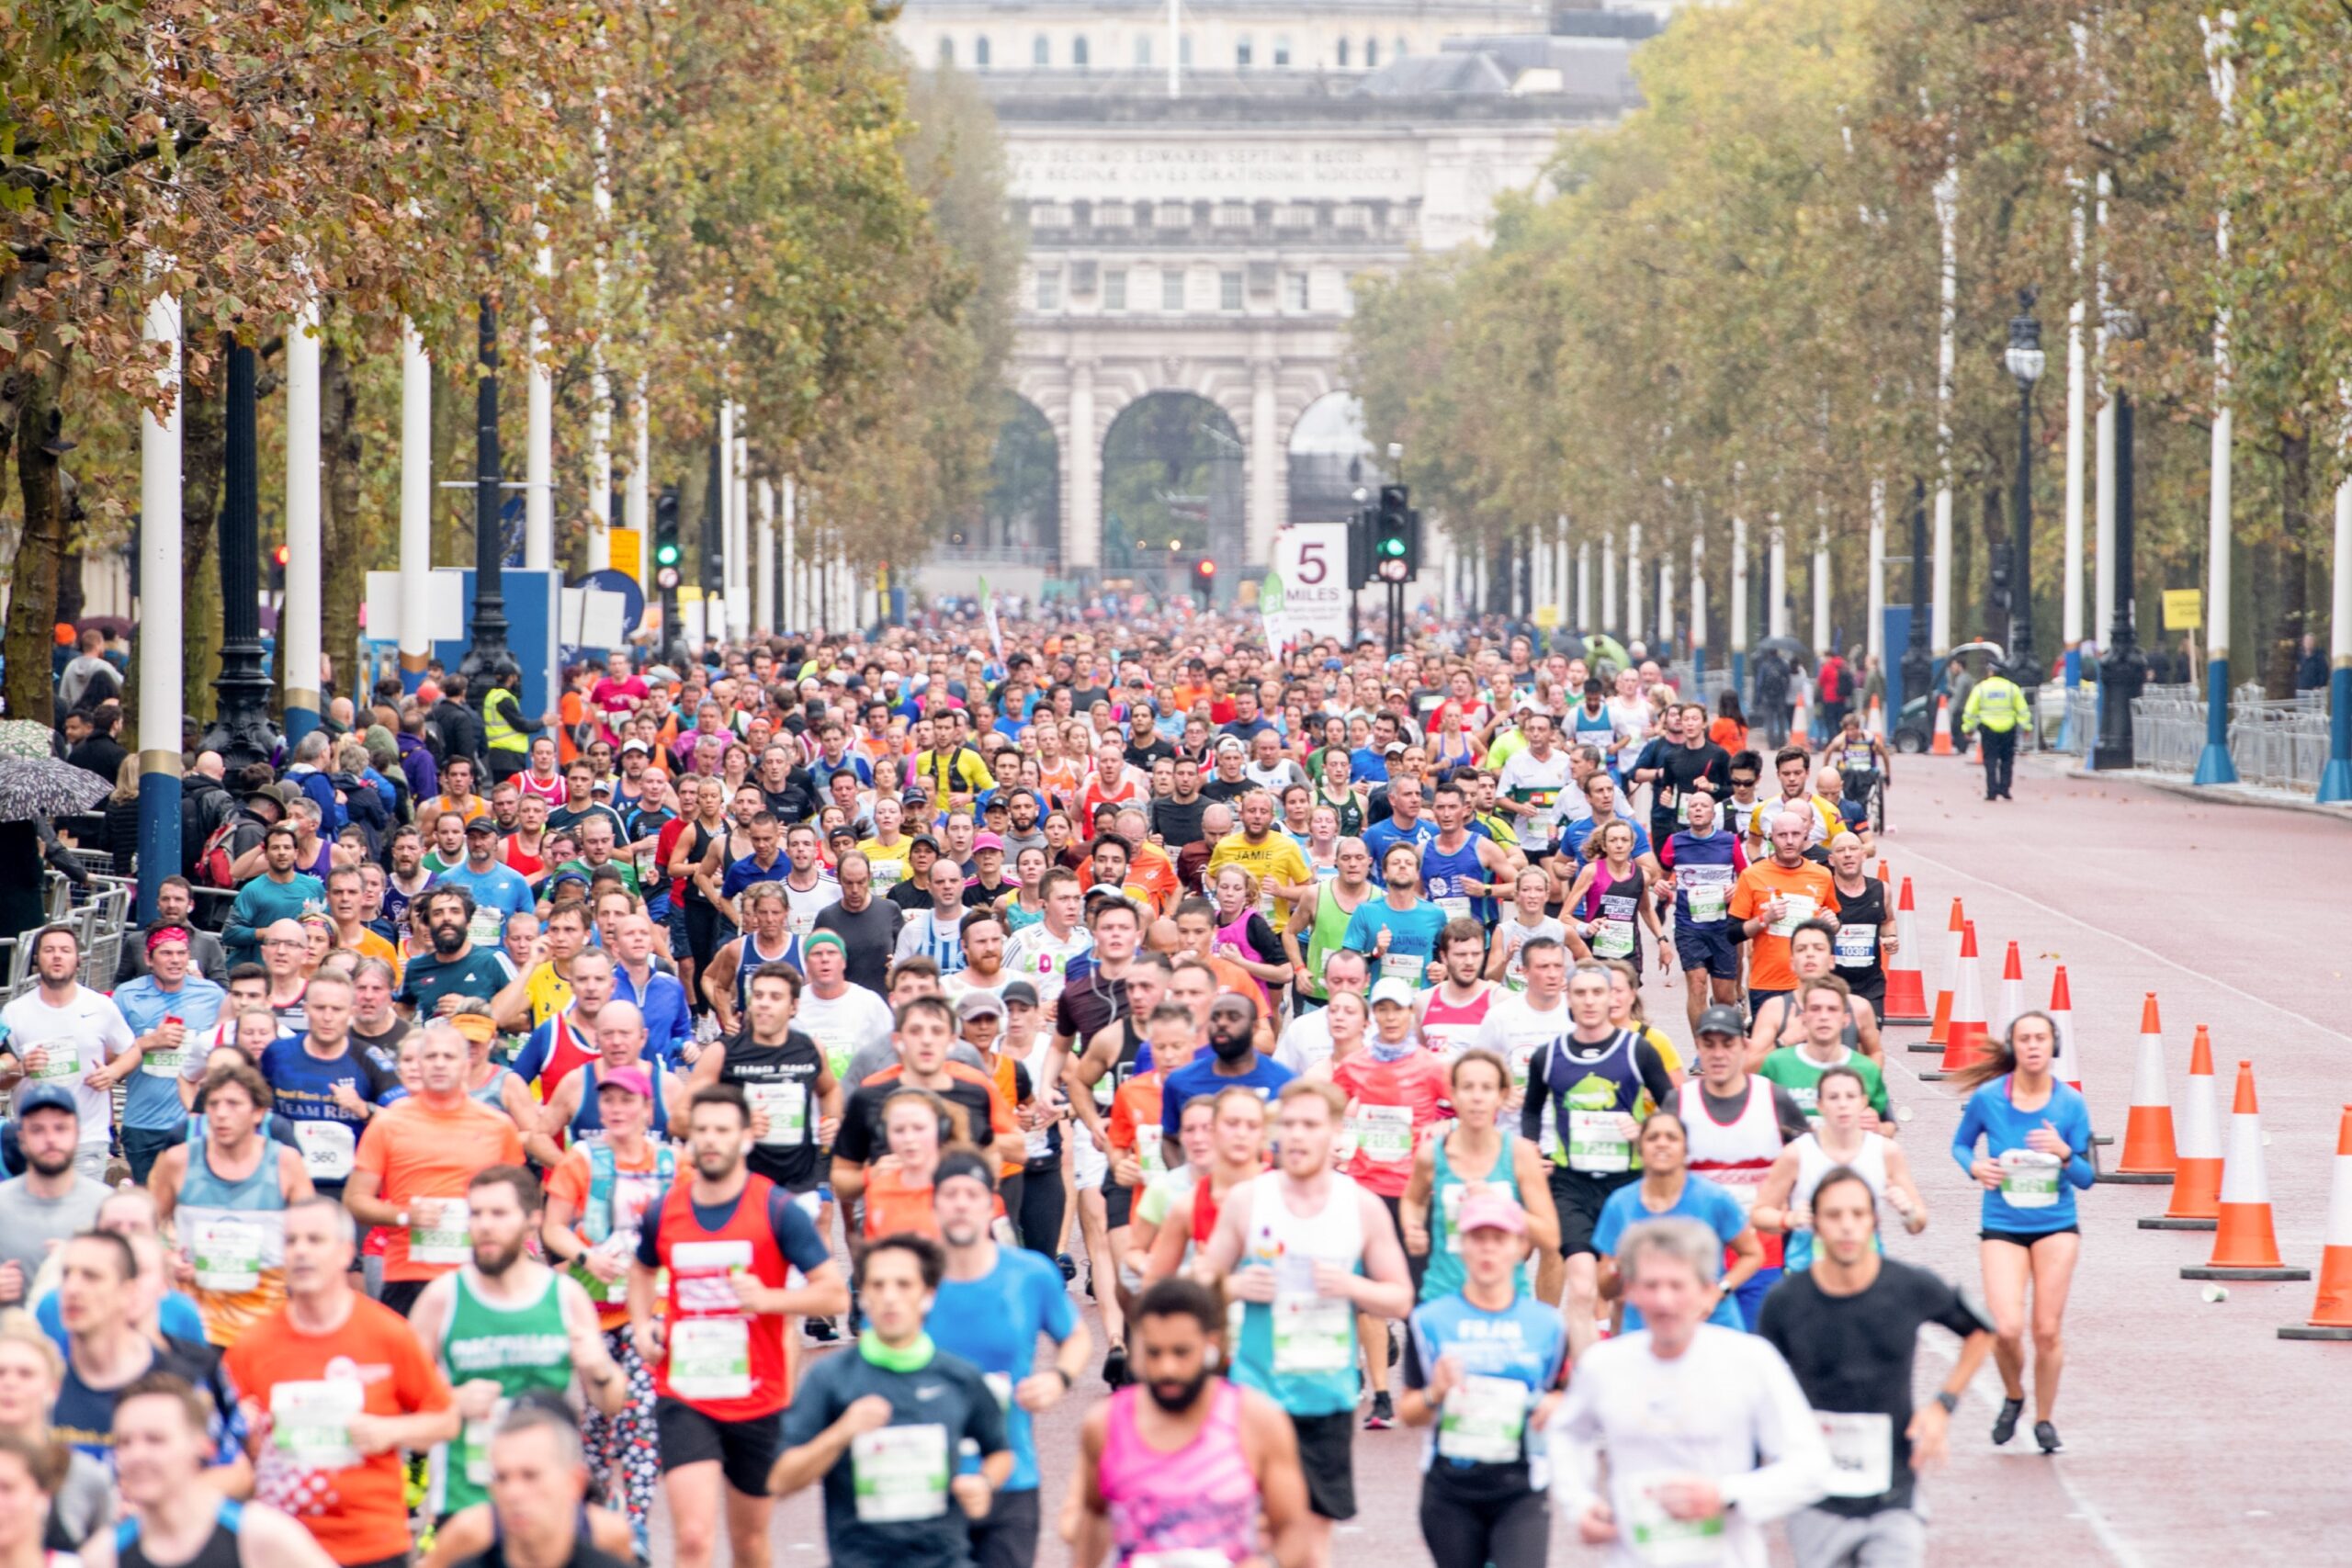 A large number of participants in the Royal Parks Half Marathon run towards the camera.